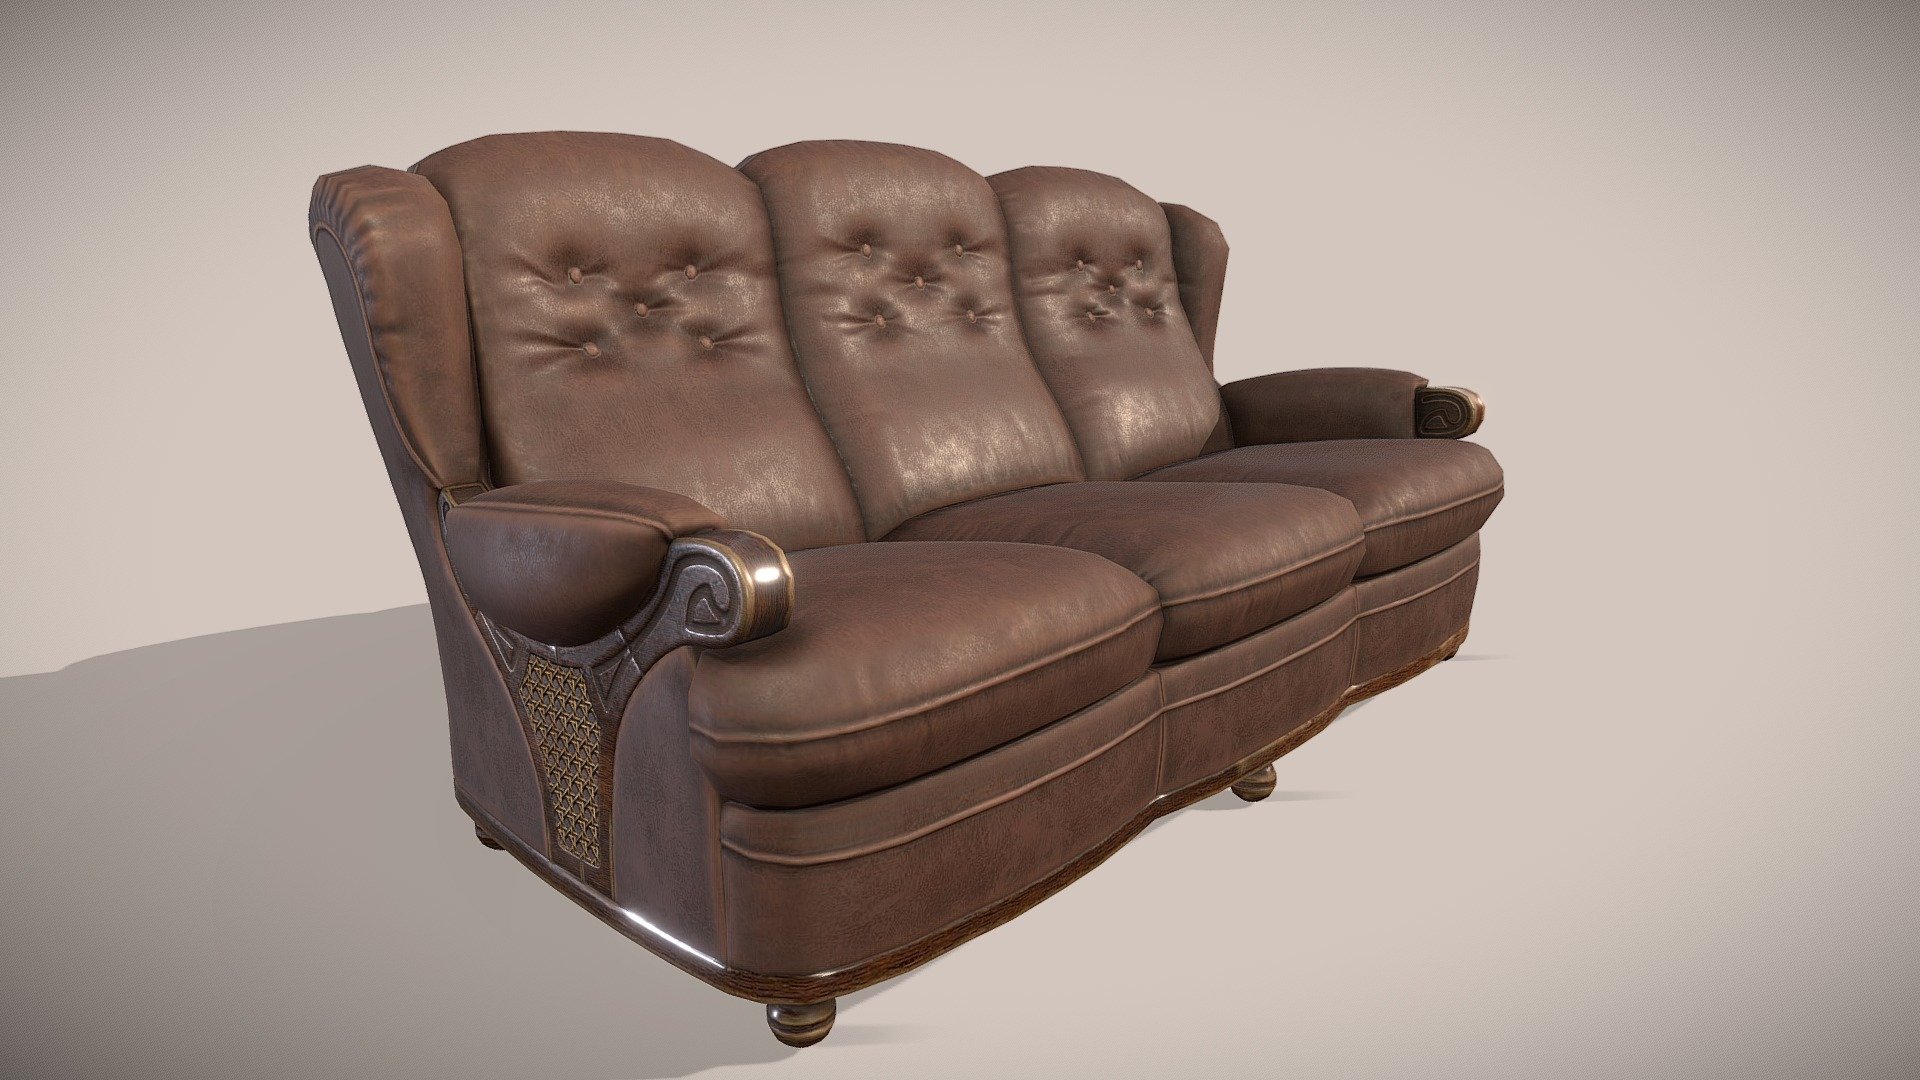 Classic lowpoly sofa. FBX file included.
2k pbr textures 3d model